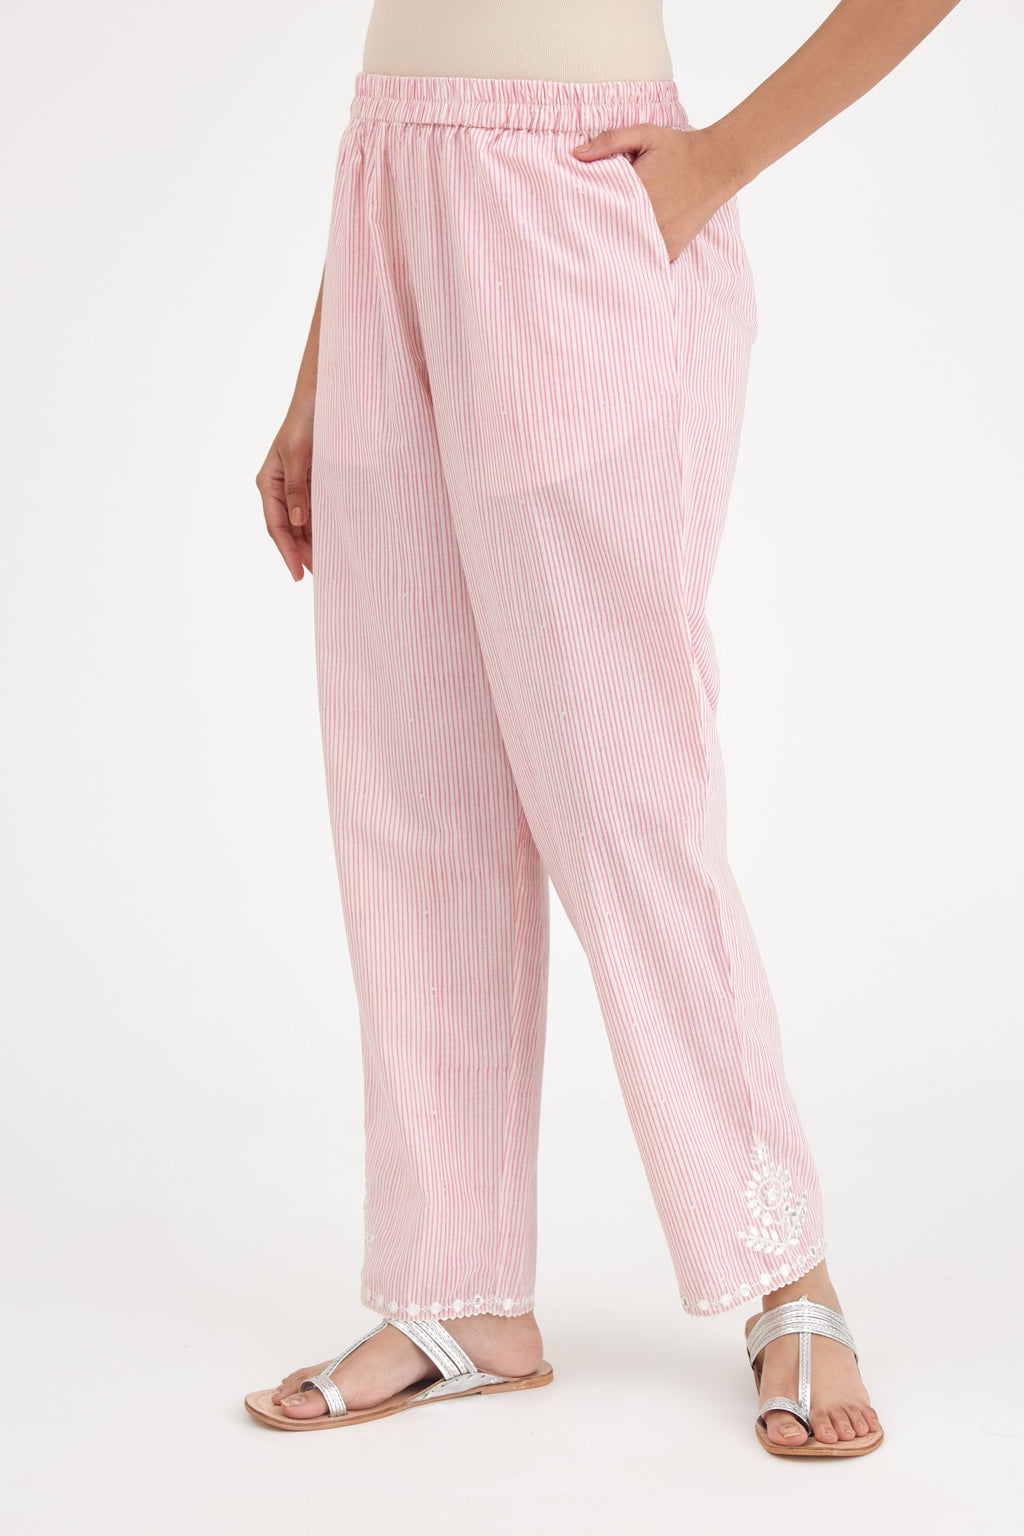 Hand-block printed striped Cotton comfortable fit pant with all-over elasticated waistband.